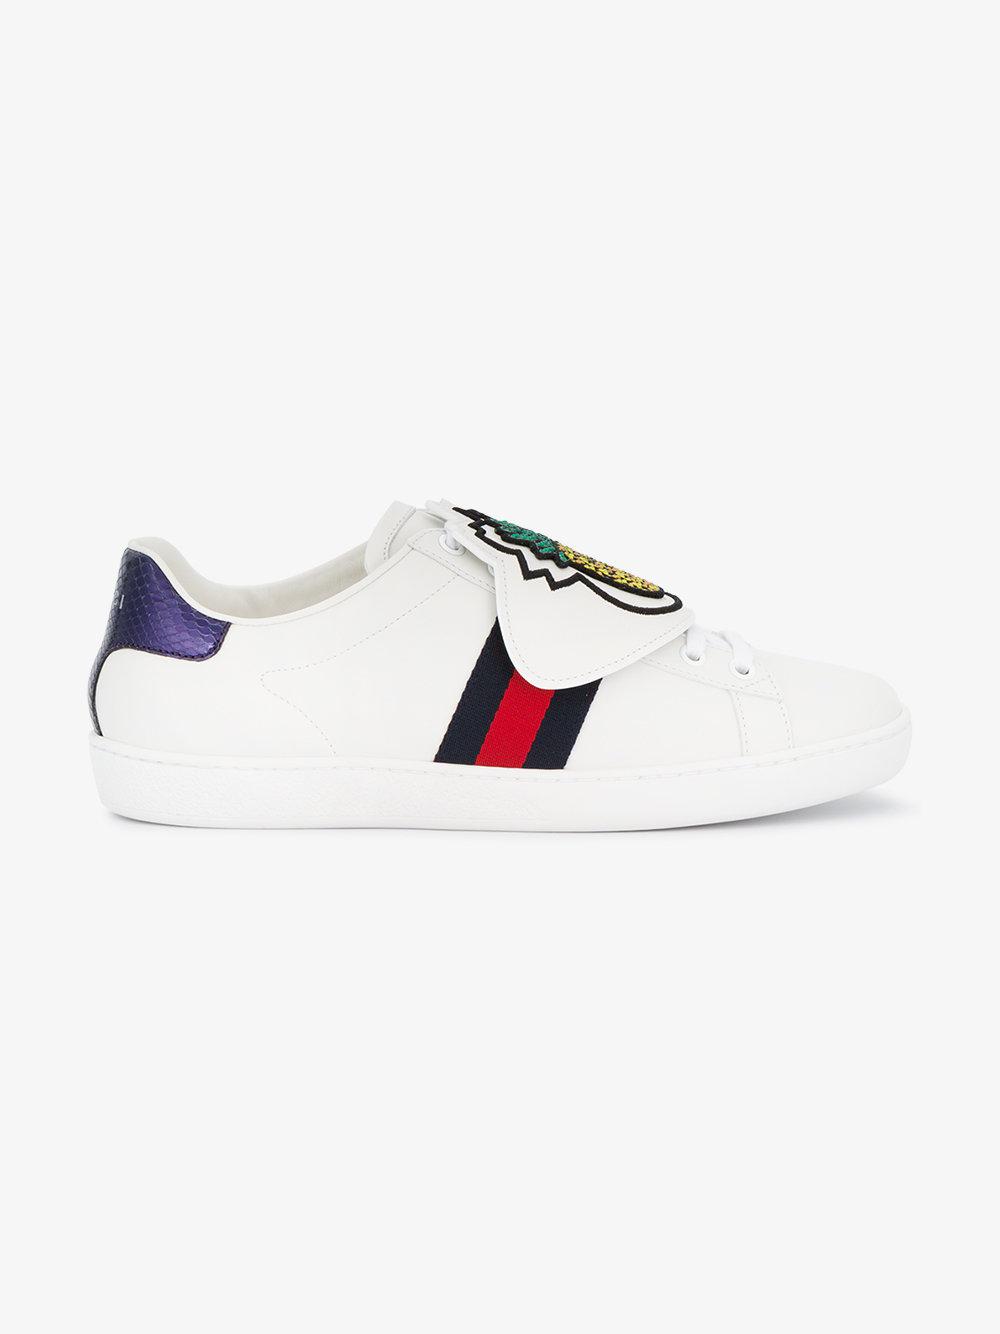 Gucci Leather 'ace' Pineapple Sneakers in White | Lyst